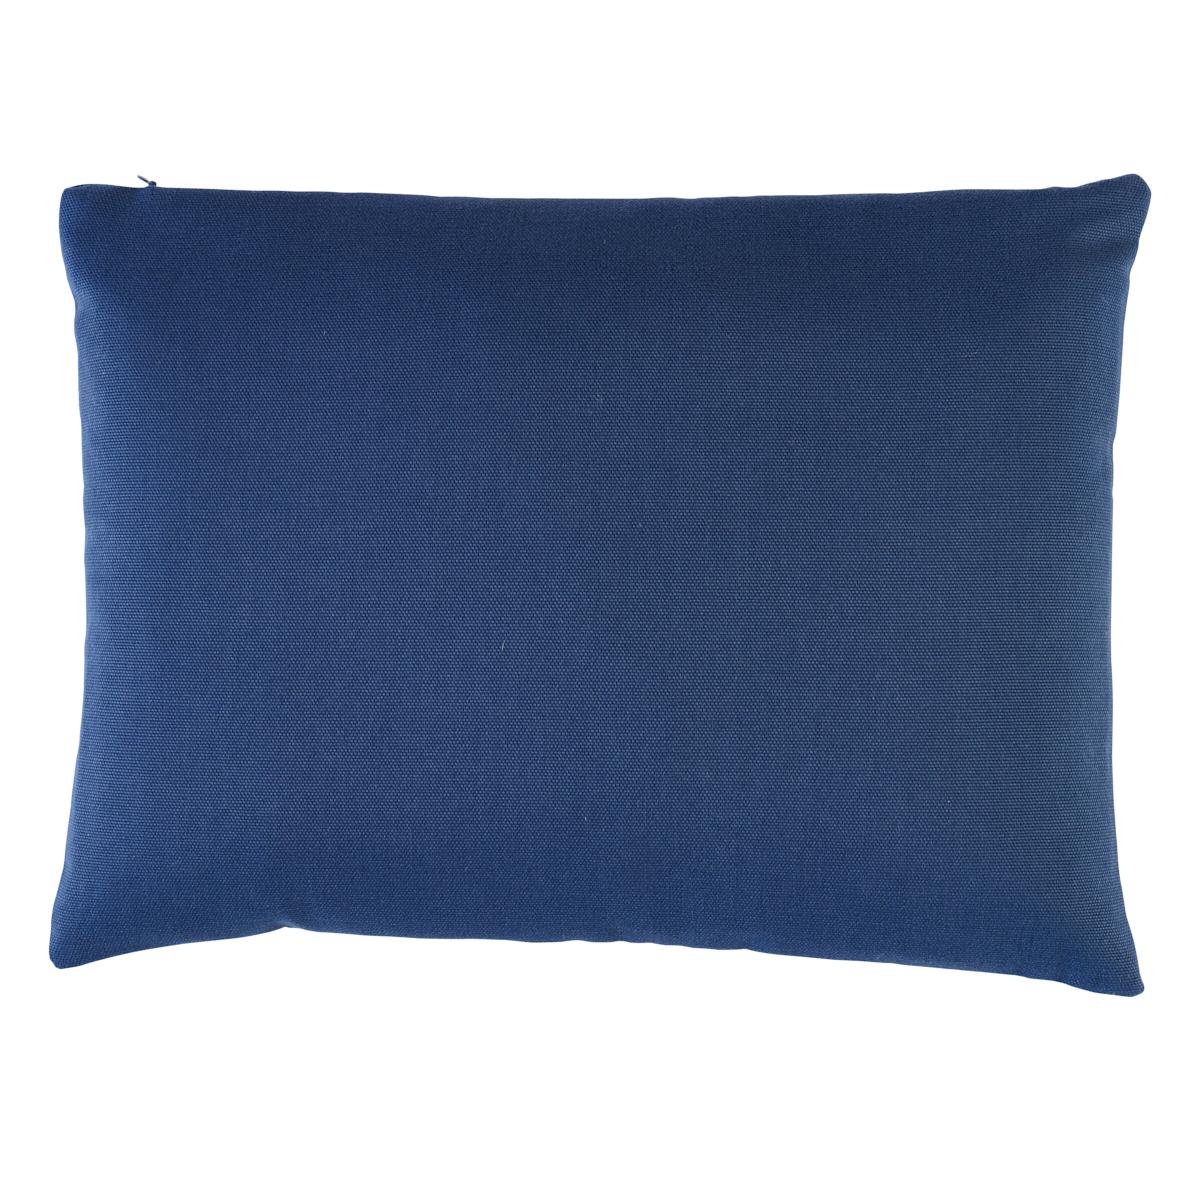 This pillow features The Twist Embroidered Tape with a knife edge finish. Satin stitched on linen, this twisting stripe has a unique, ombré effect and cool, retro flair. Body of pillow is Elliott Brushed Cotton. Pillow includes a feather/down fill